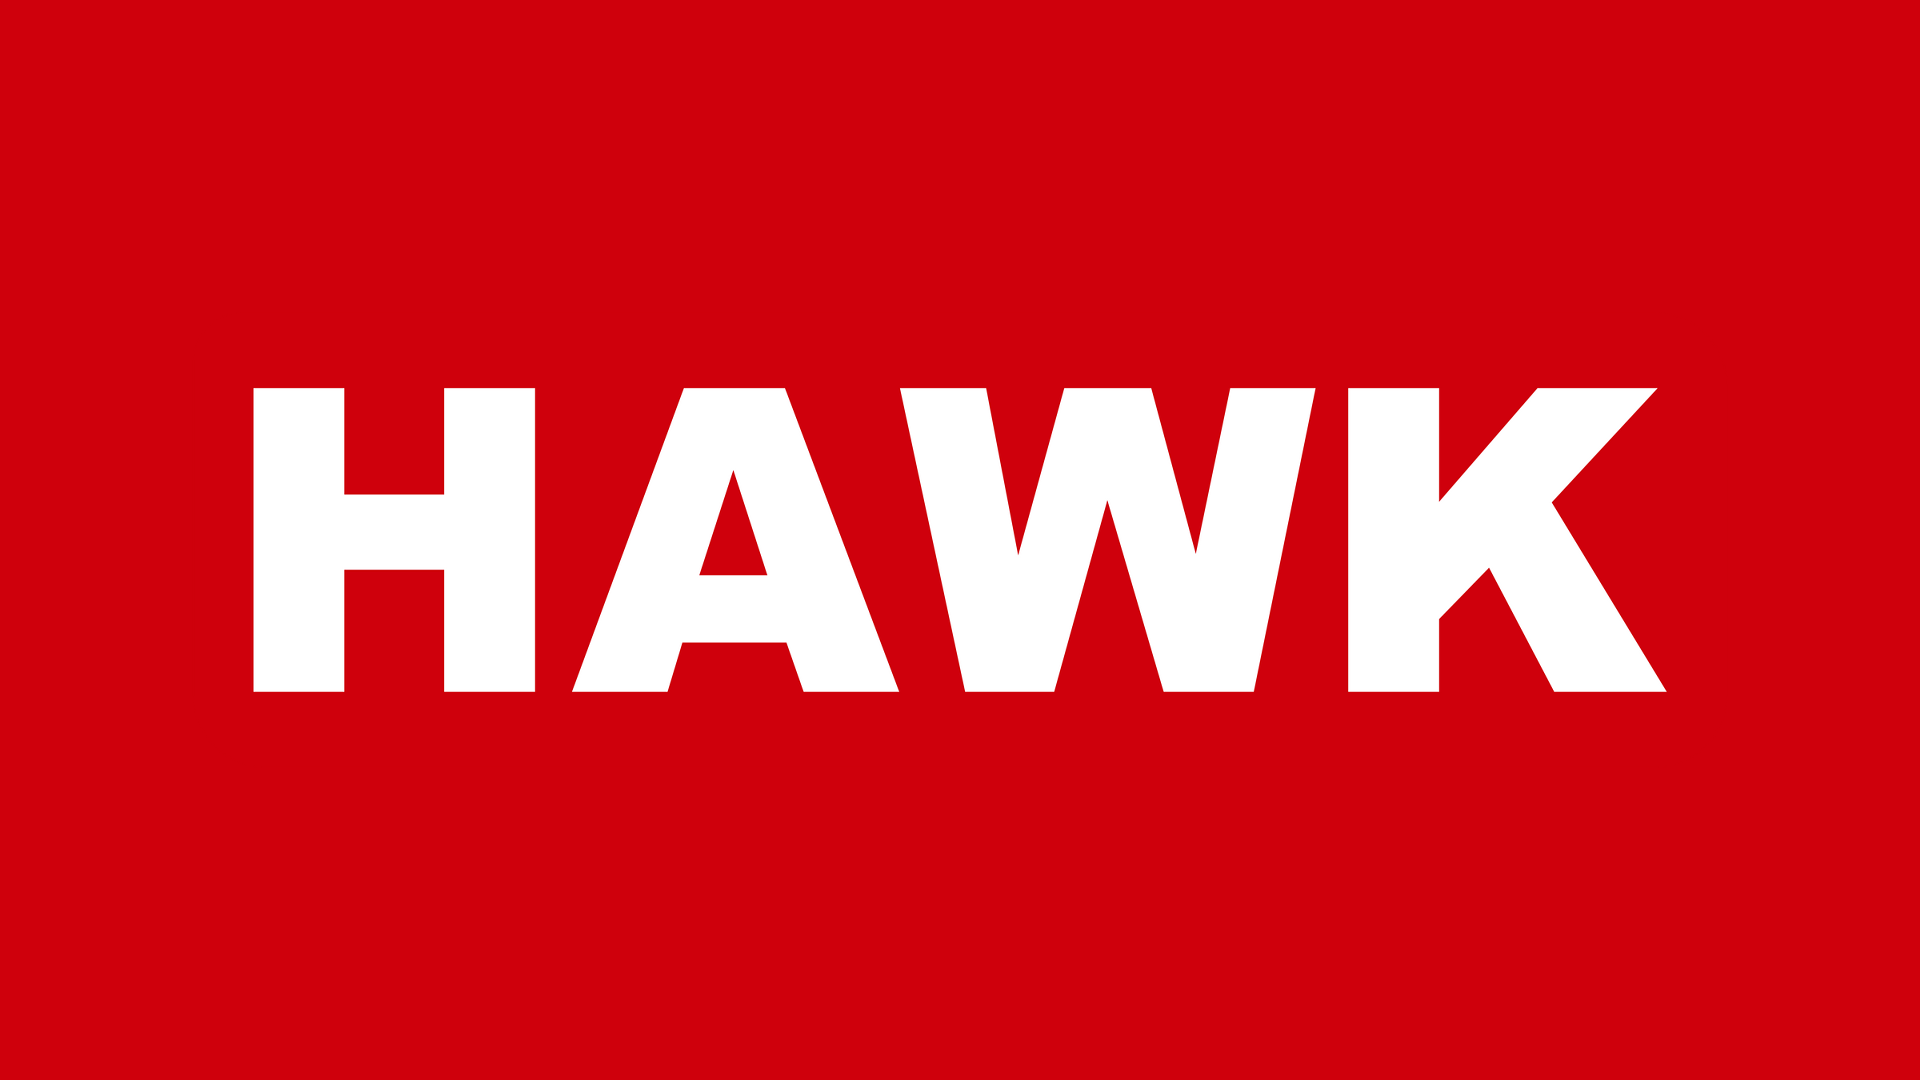 A red sign that says hawk in white letters